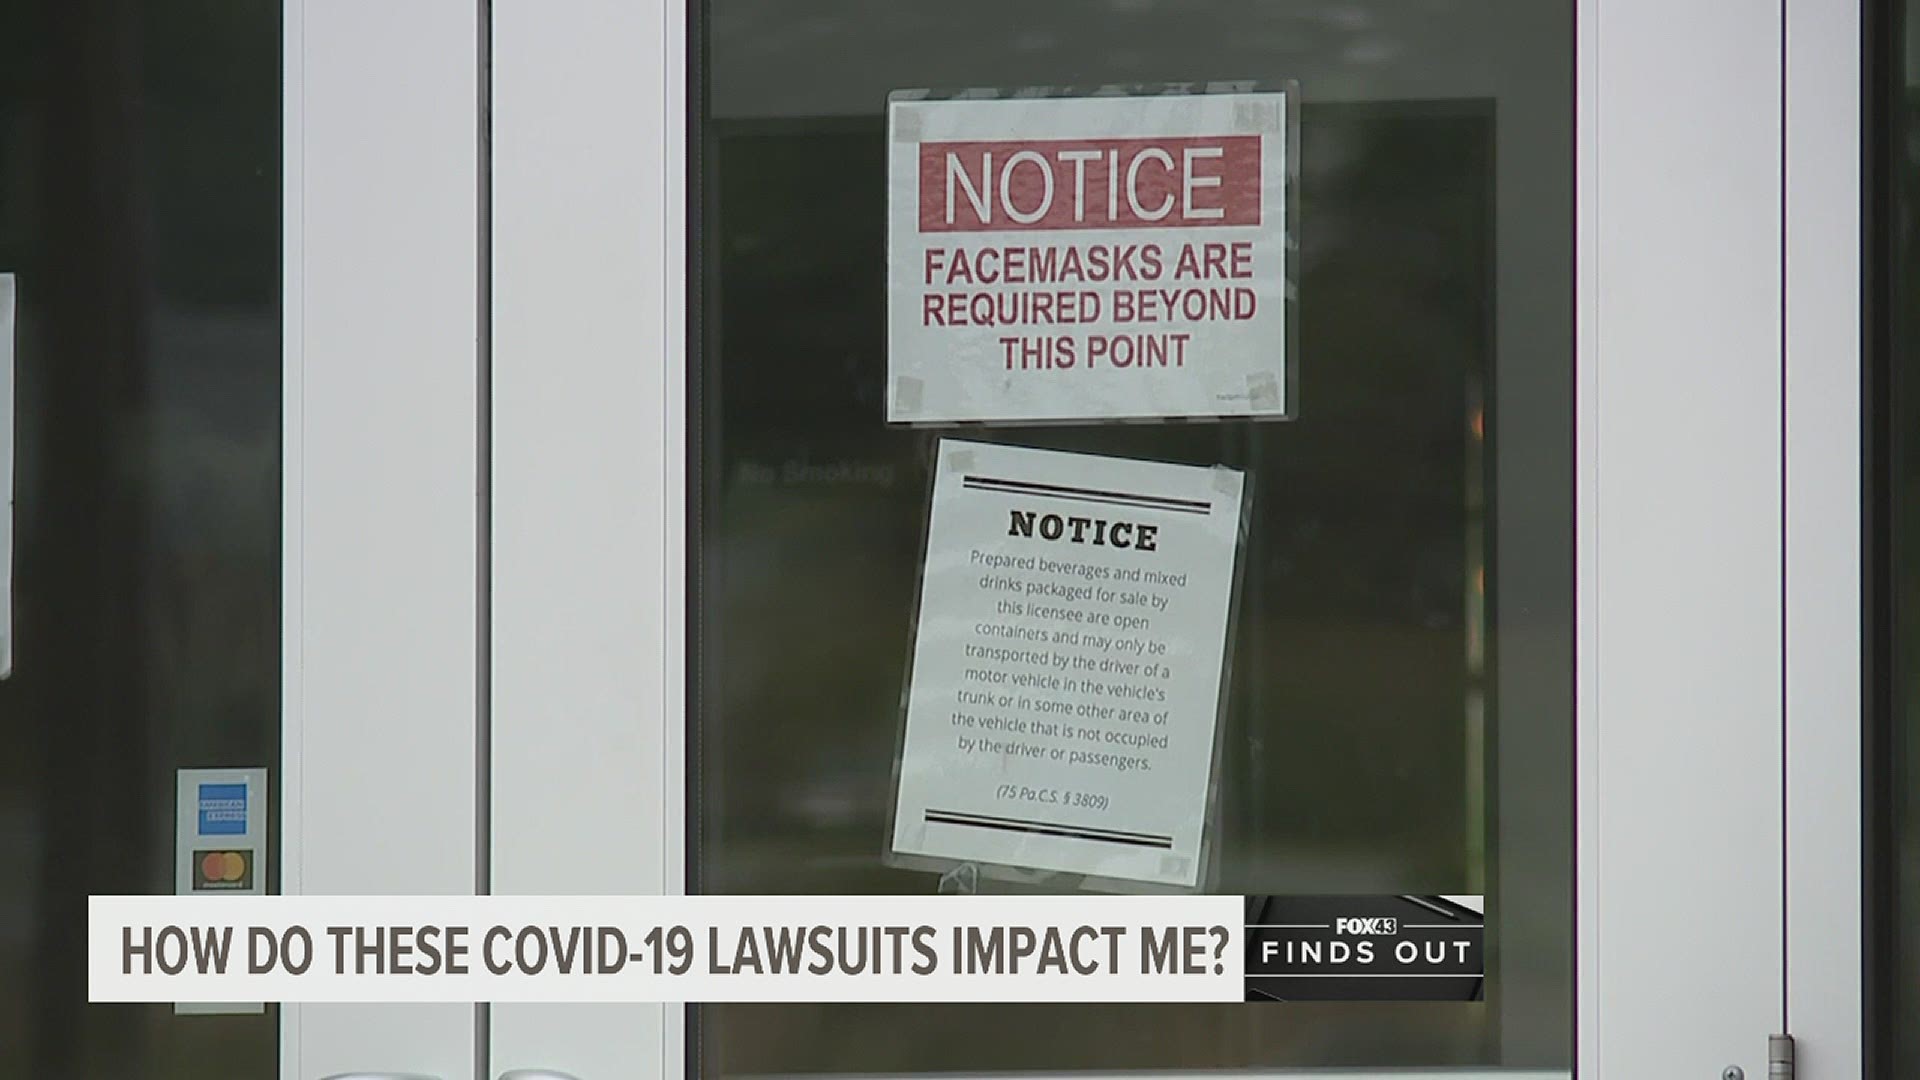 These lawsuits against COVID-19 restrictions are making headlines, but what do they really mean for the average Pennsylvanian? FOX43 Finds Out.